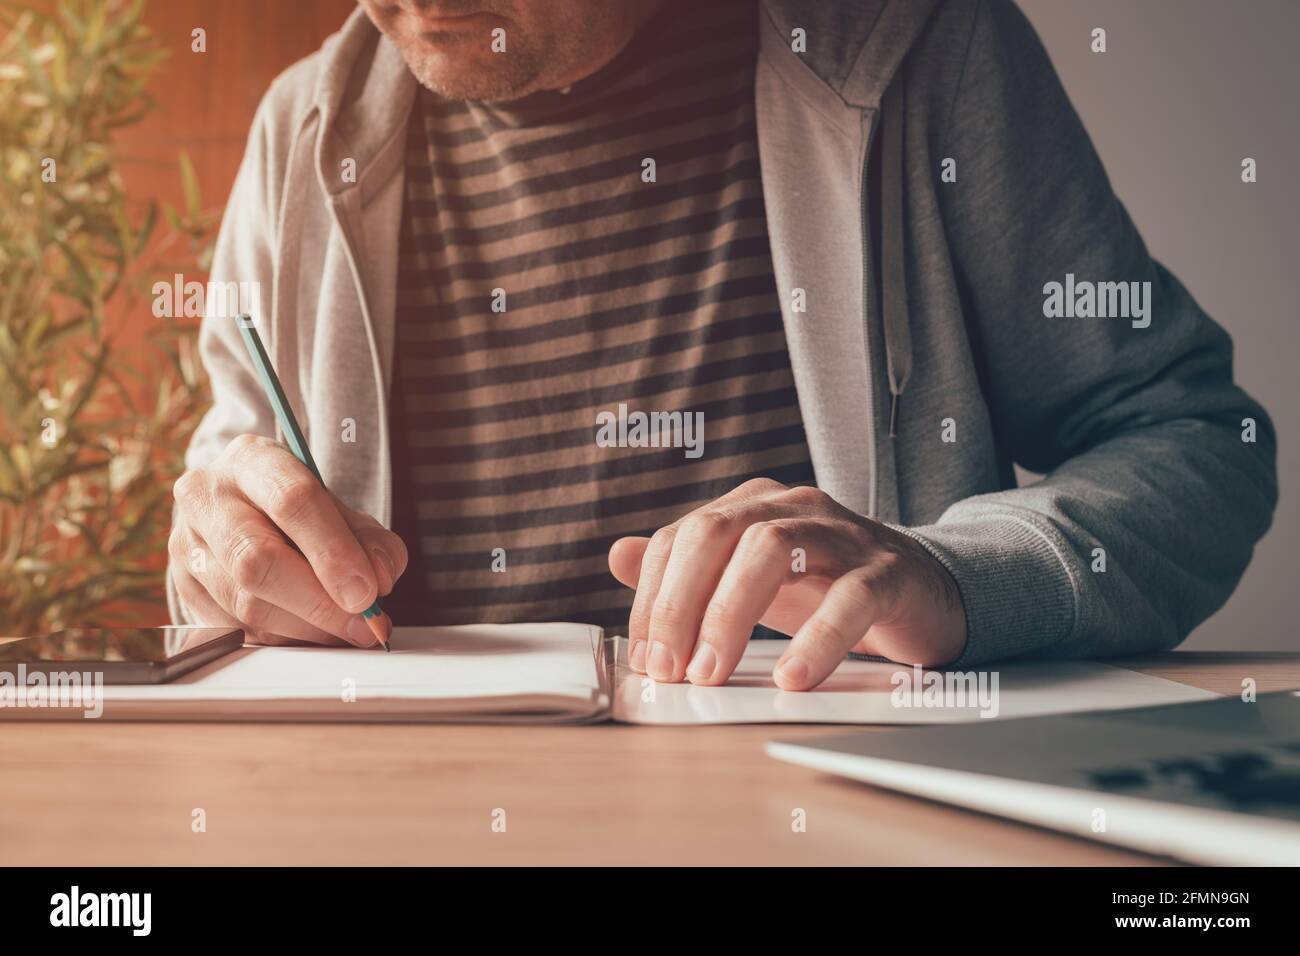 Freelance worker writing notes at home office desk, close up with selective focus Stock Photo